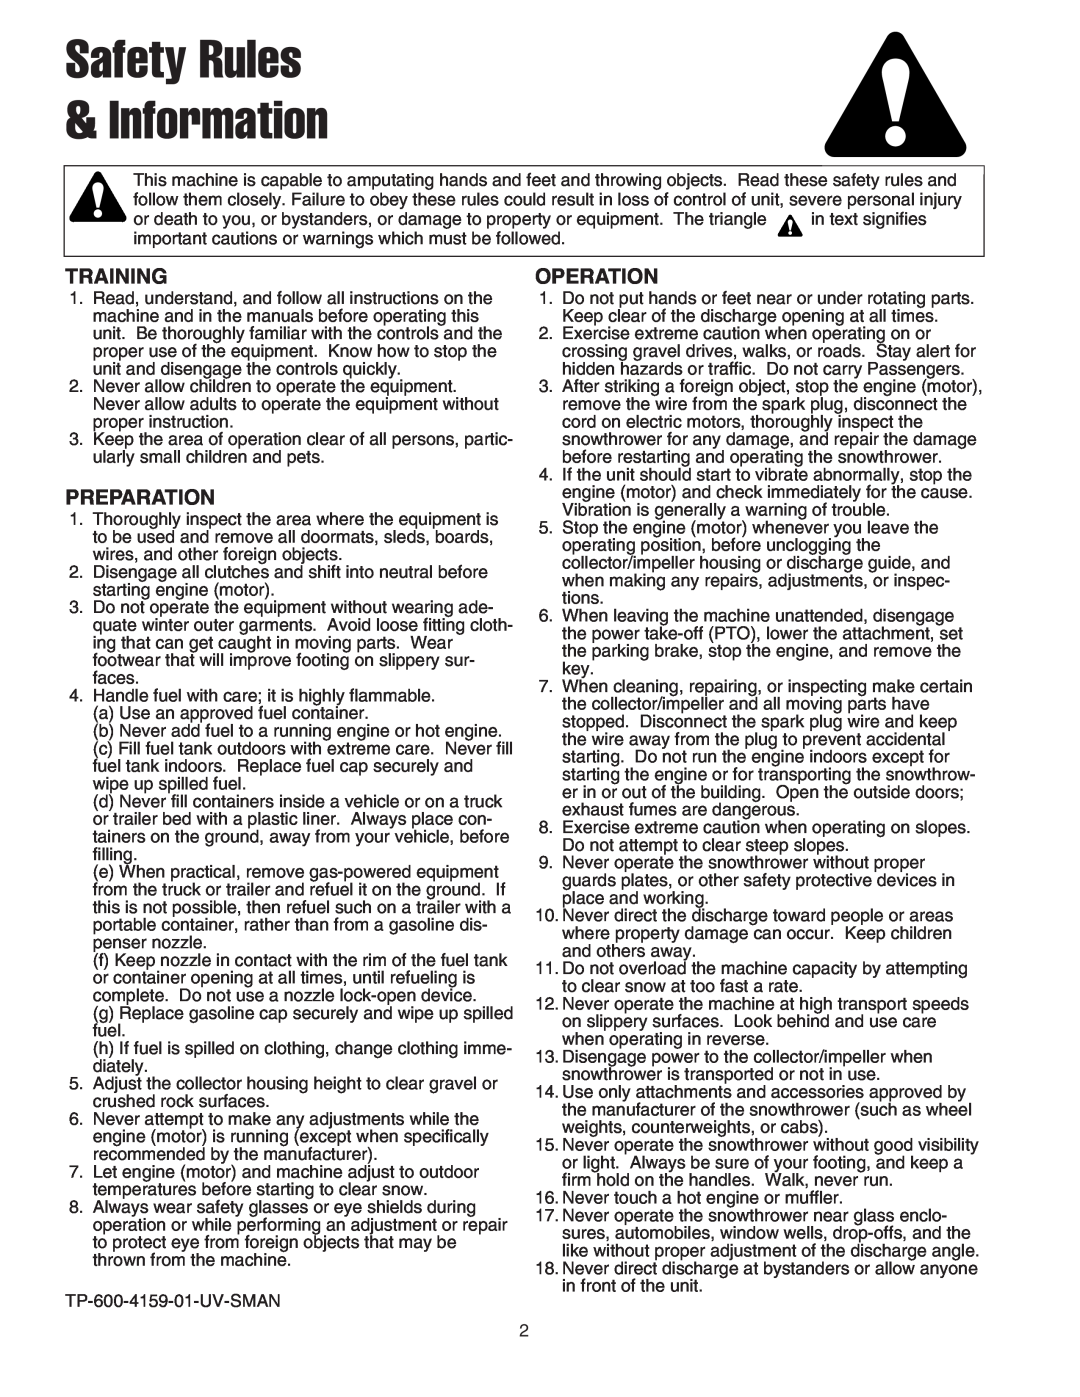 Snapper 42" Single-Stage Snowthrower manual Safety Rules & Information, Training, Preparation, Operation 